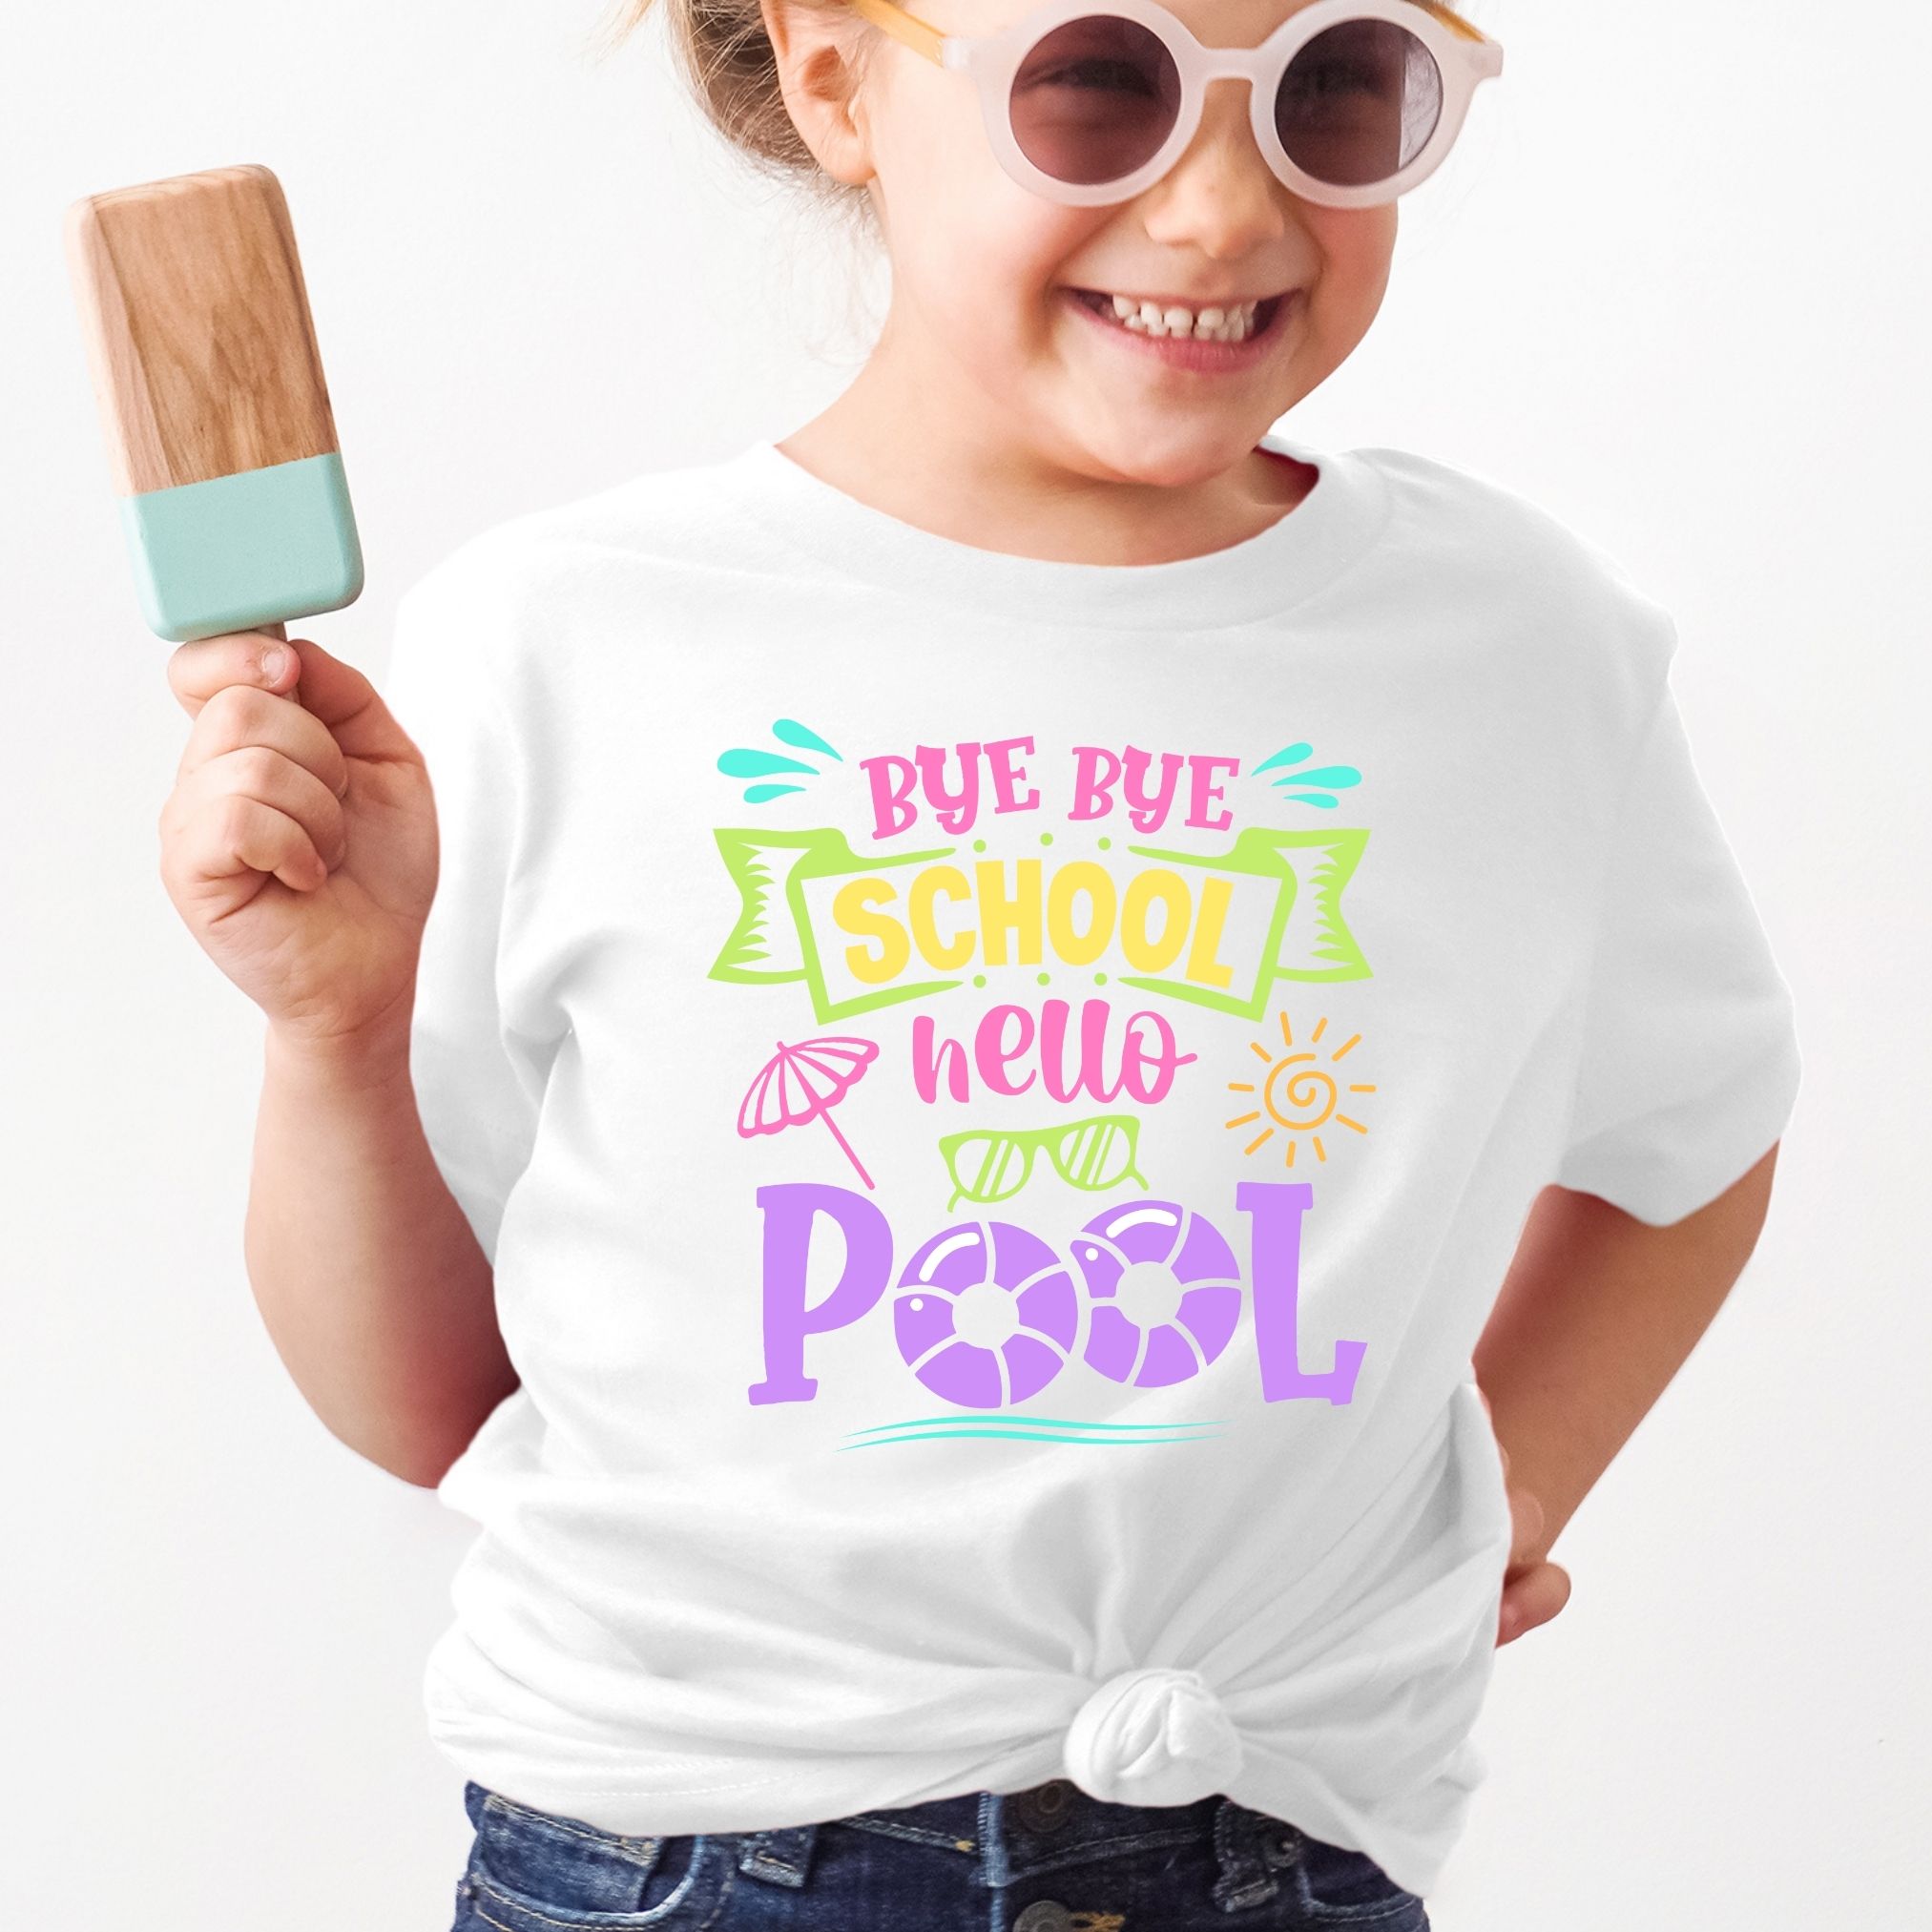 A young girl with sunglasses smiles while holding a popsicle. She is modeling a white t-shirt that says, "Bye-Bye School, Hello Pool" in bright colors.